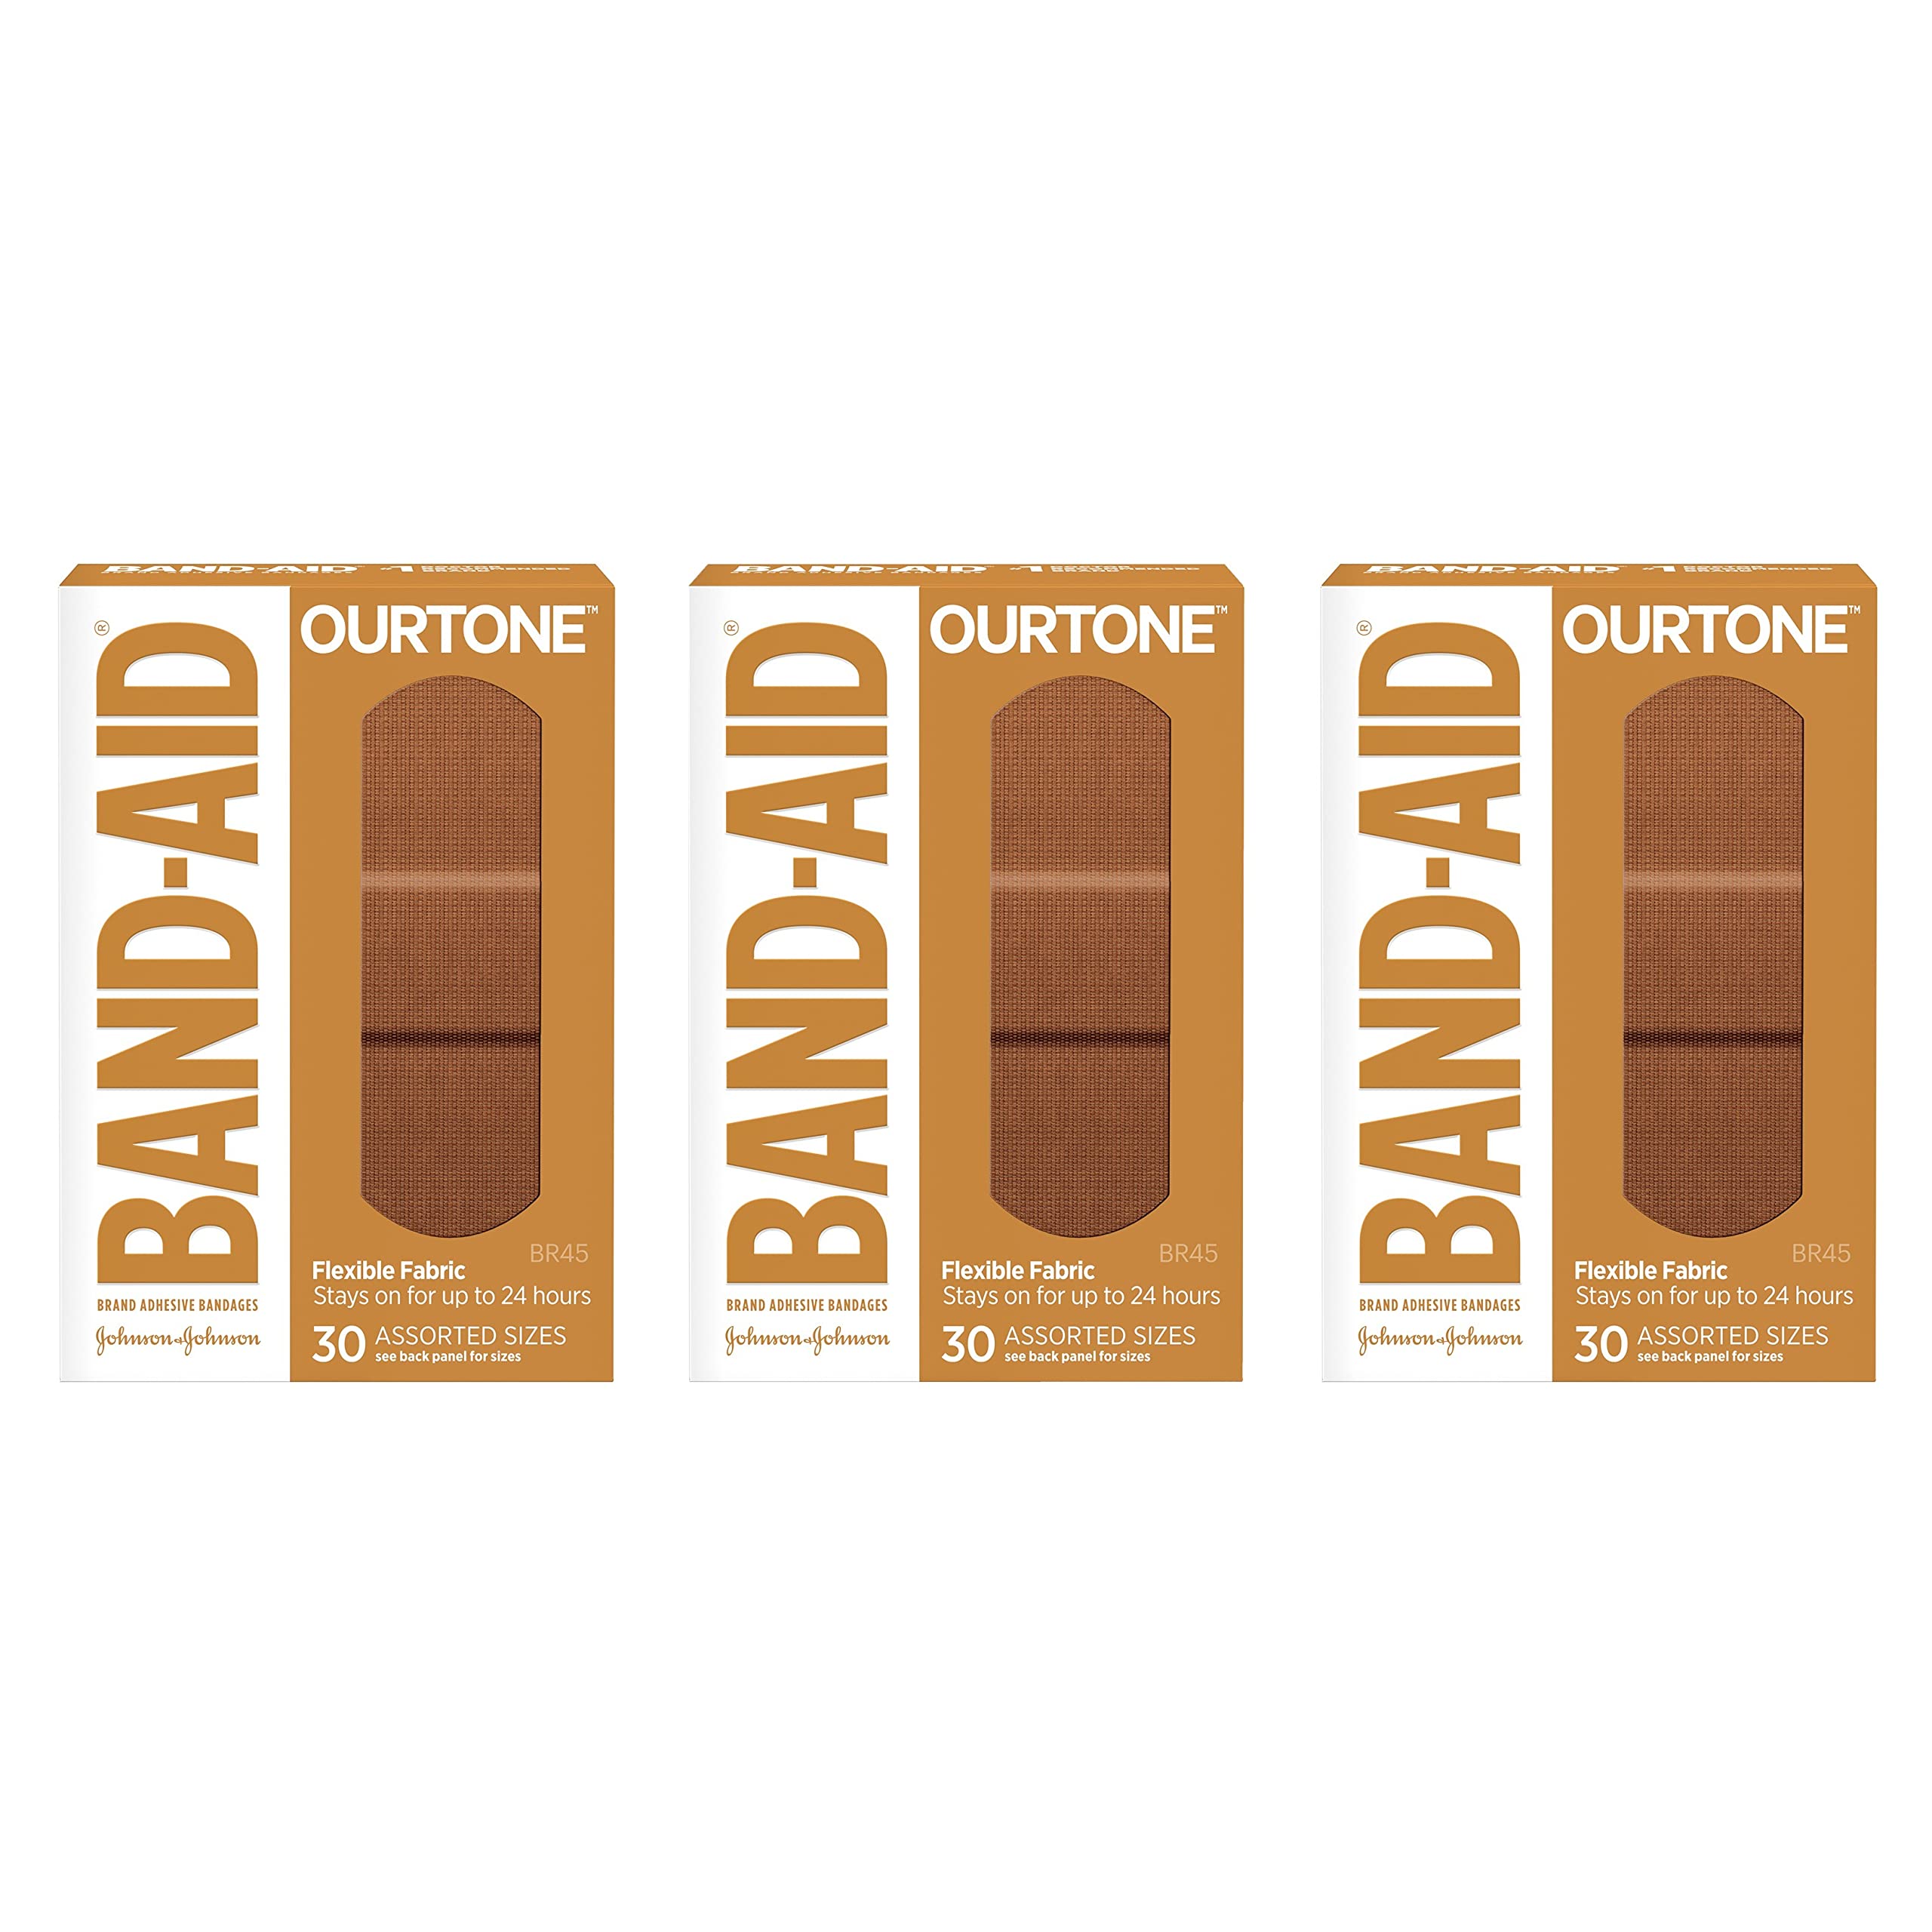 Band-Aid Brand Ourtone Adhesive Bandages Flexible Protection